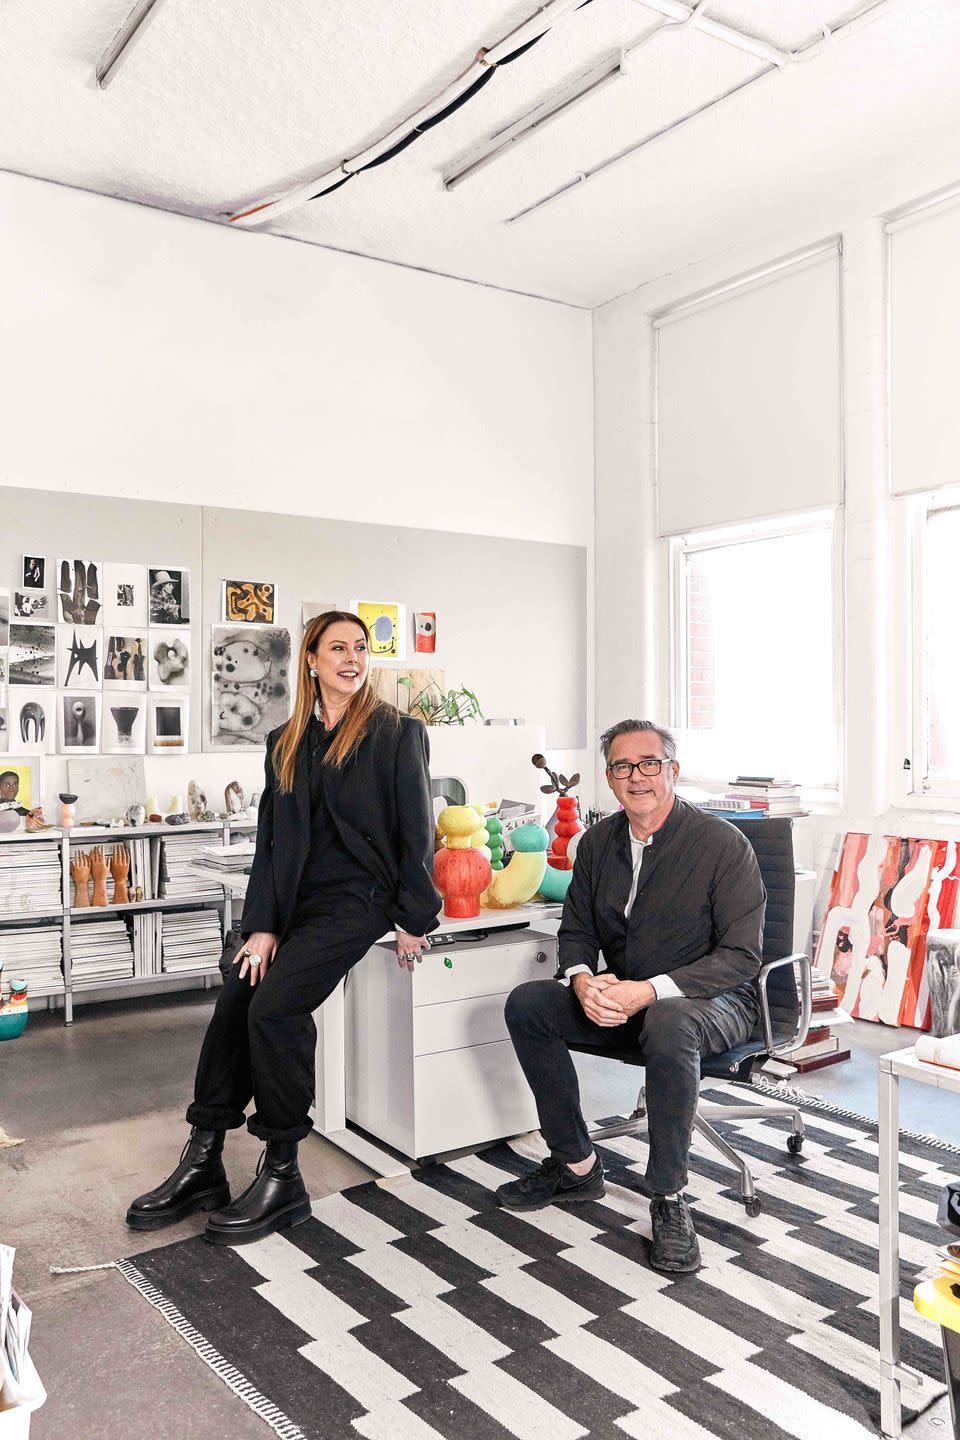 a man and a woman sitting in a room with art on the wall